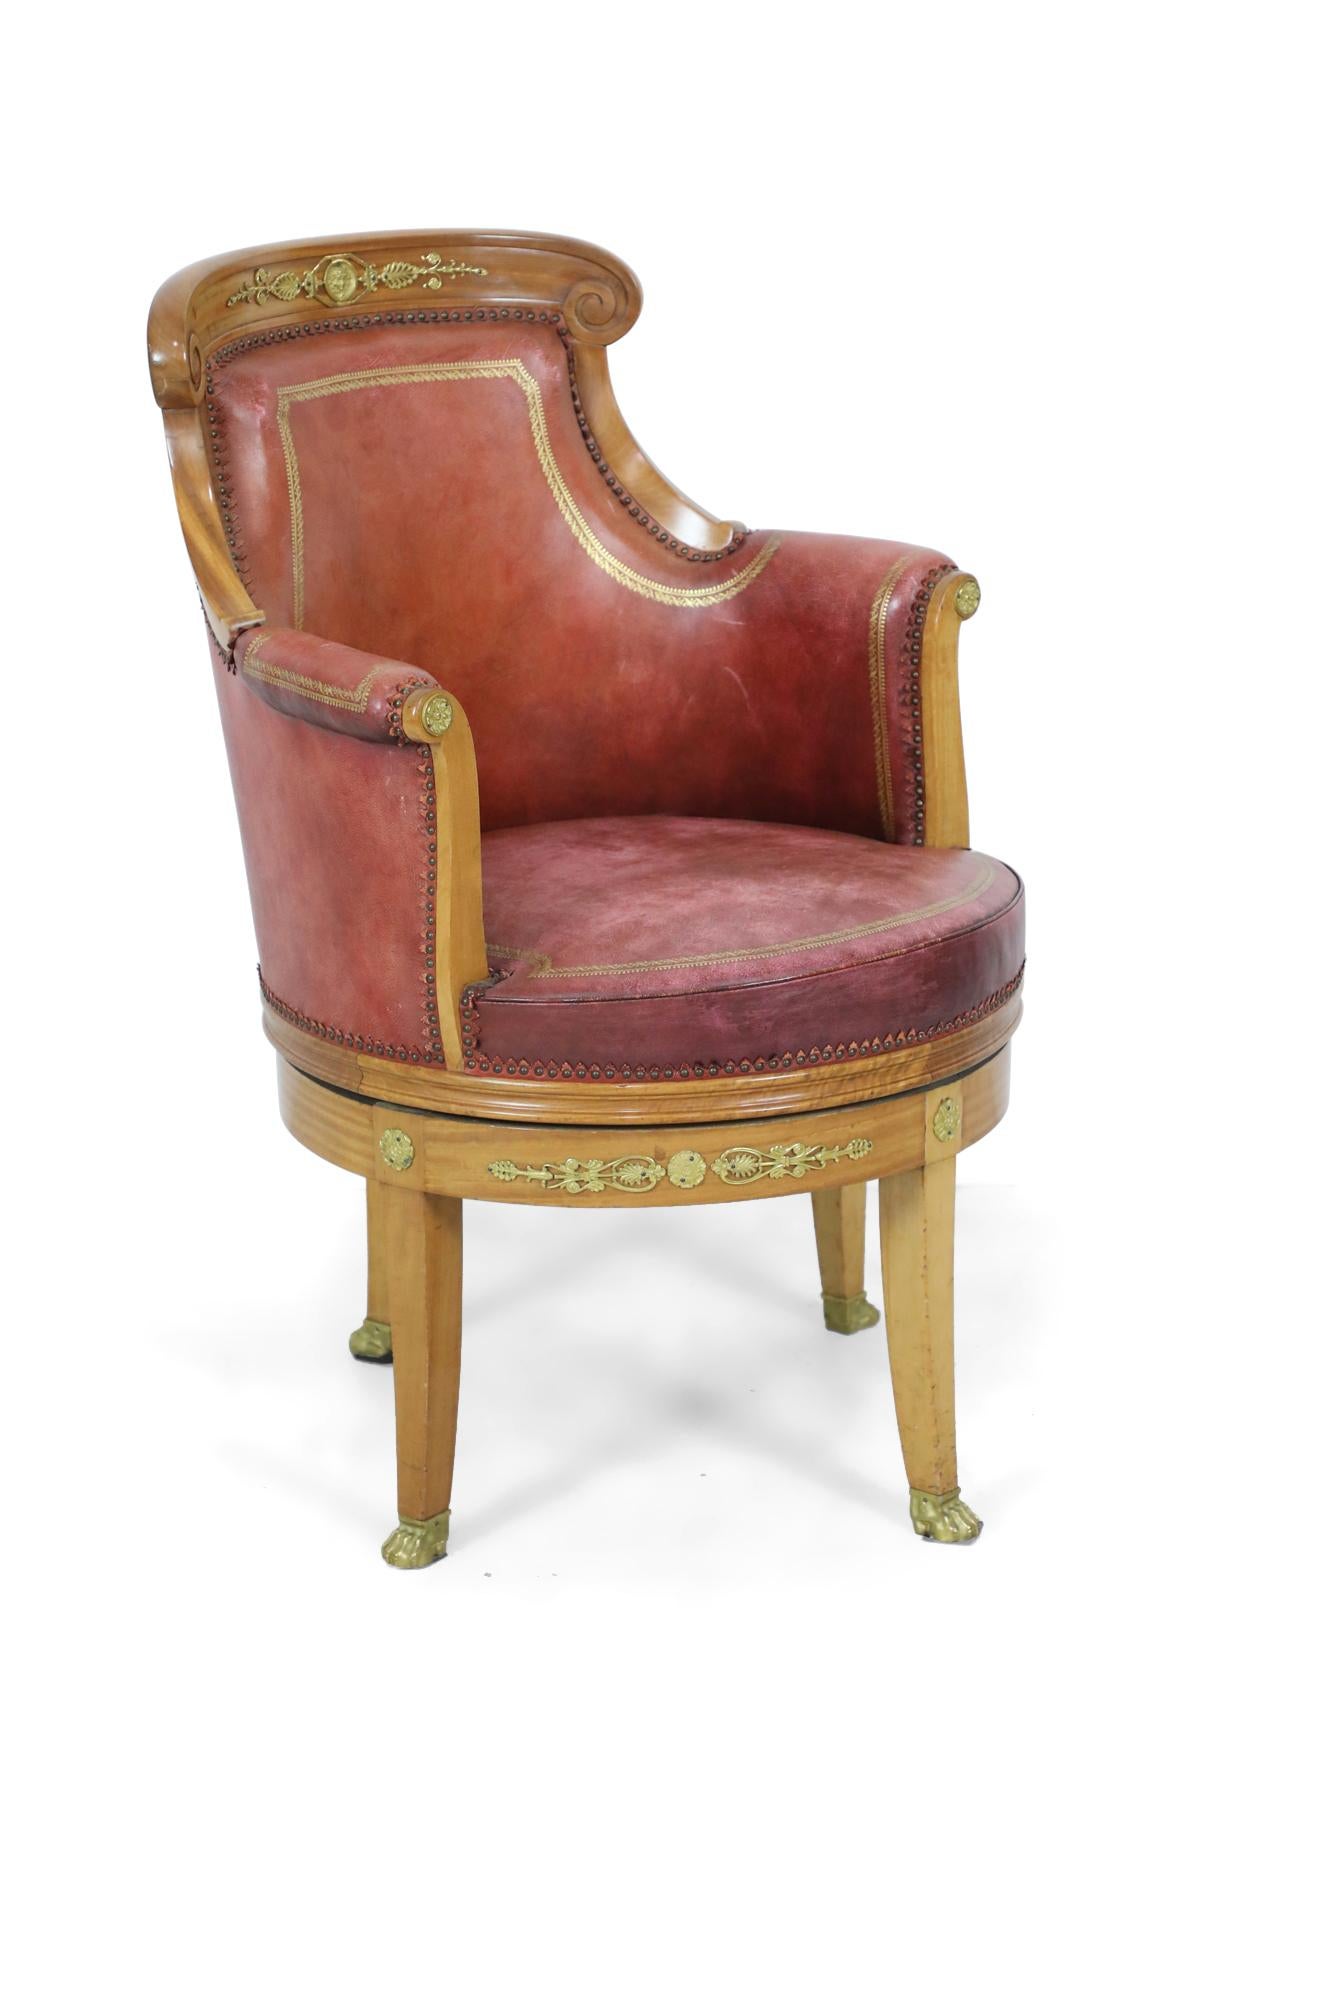 French Empire Blond Mahogany Swivel Leather Chair with Bronze Trim For Sale 4